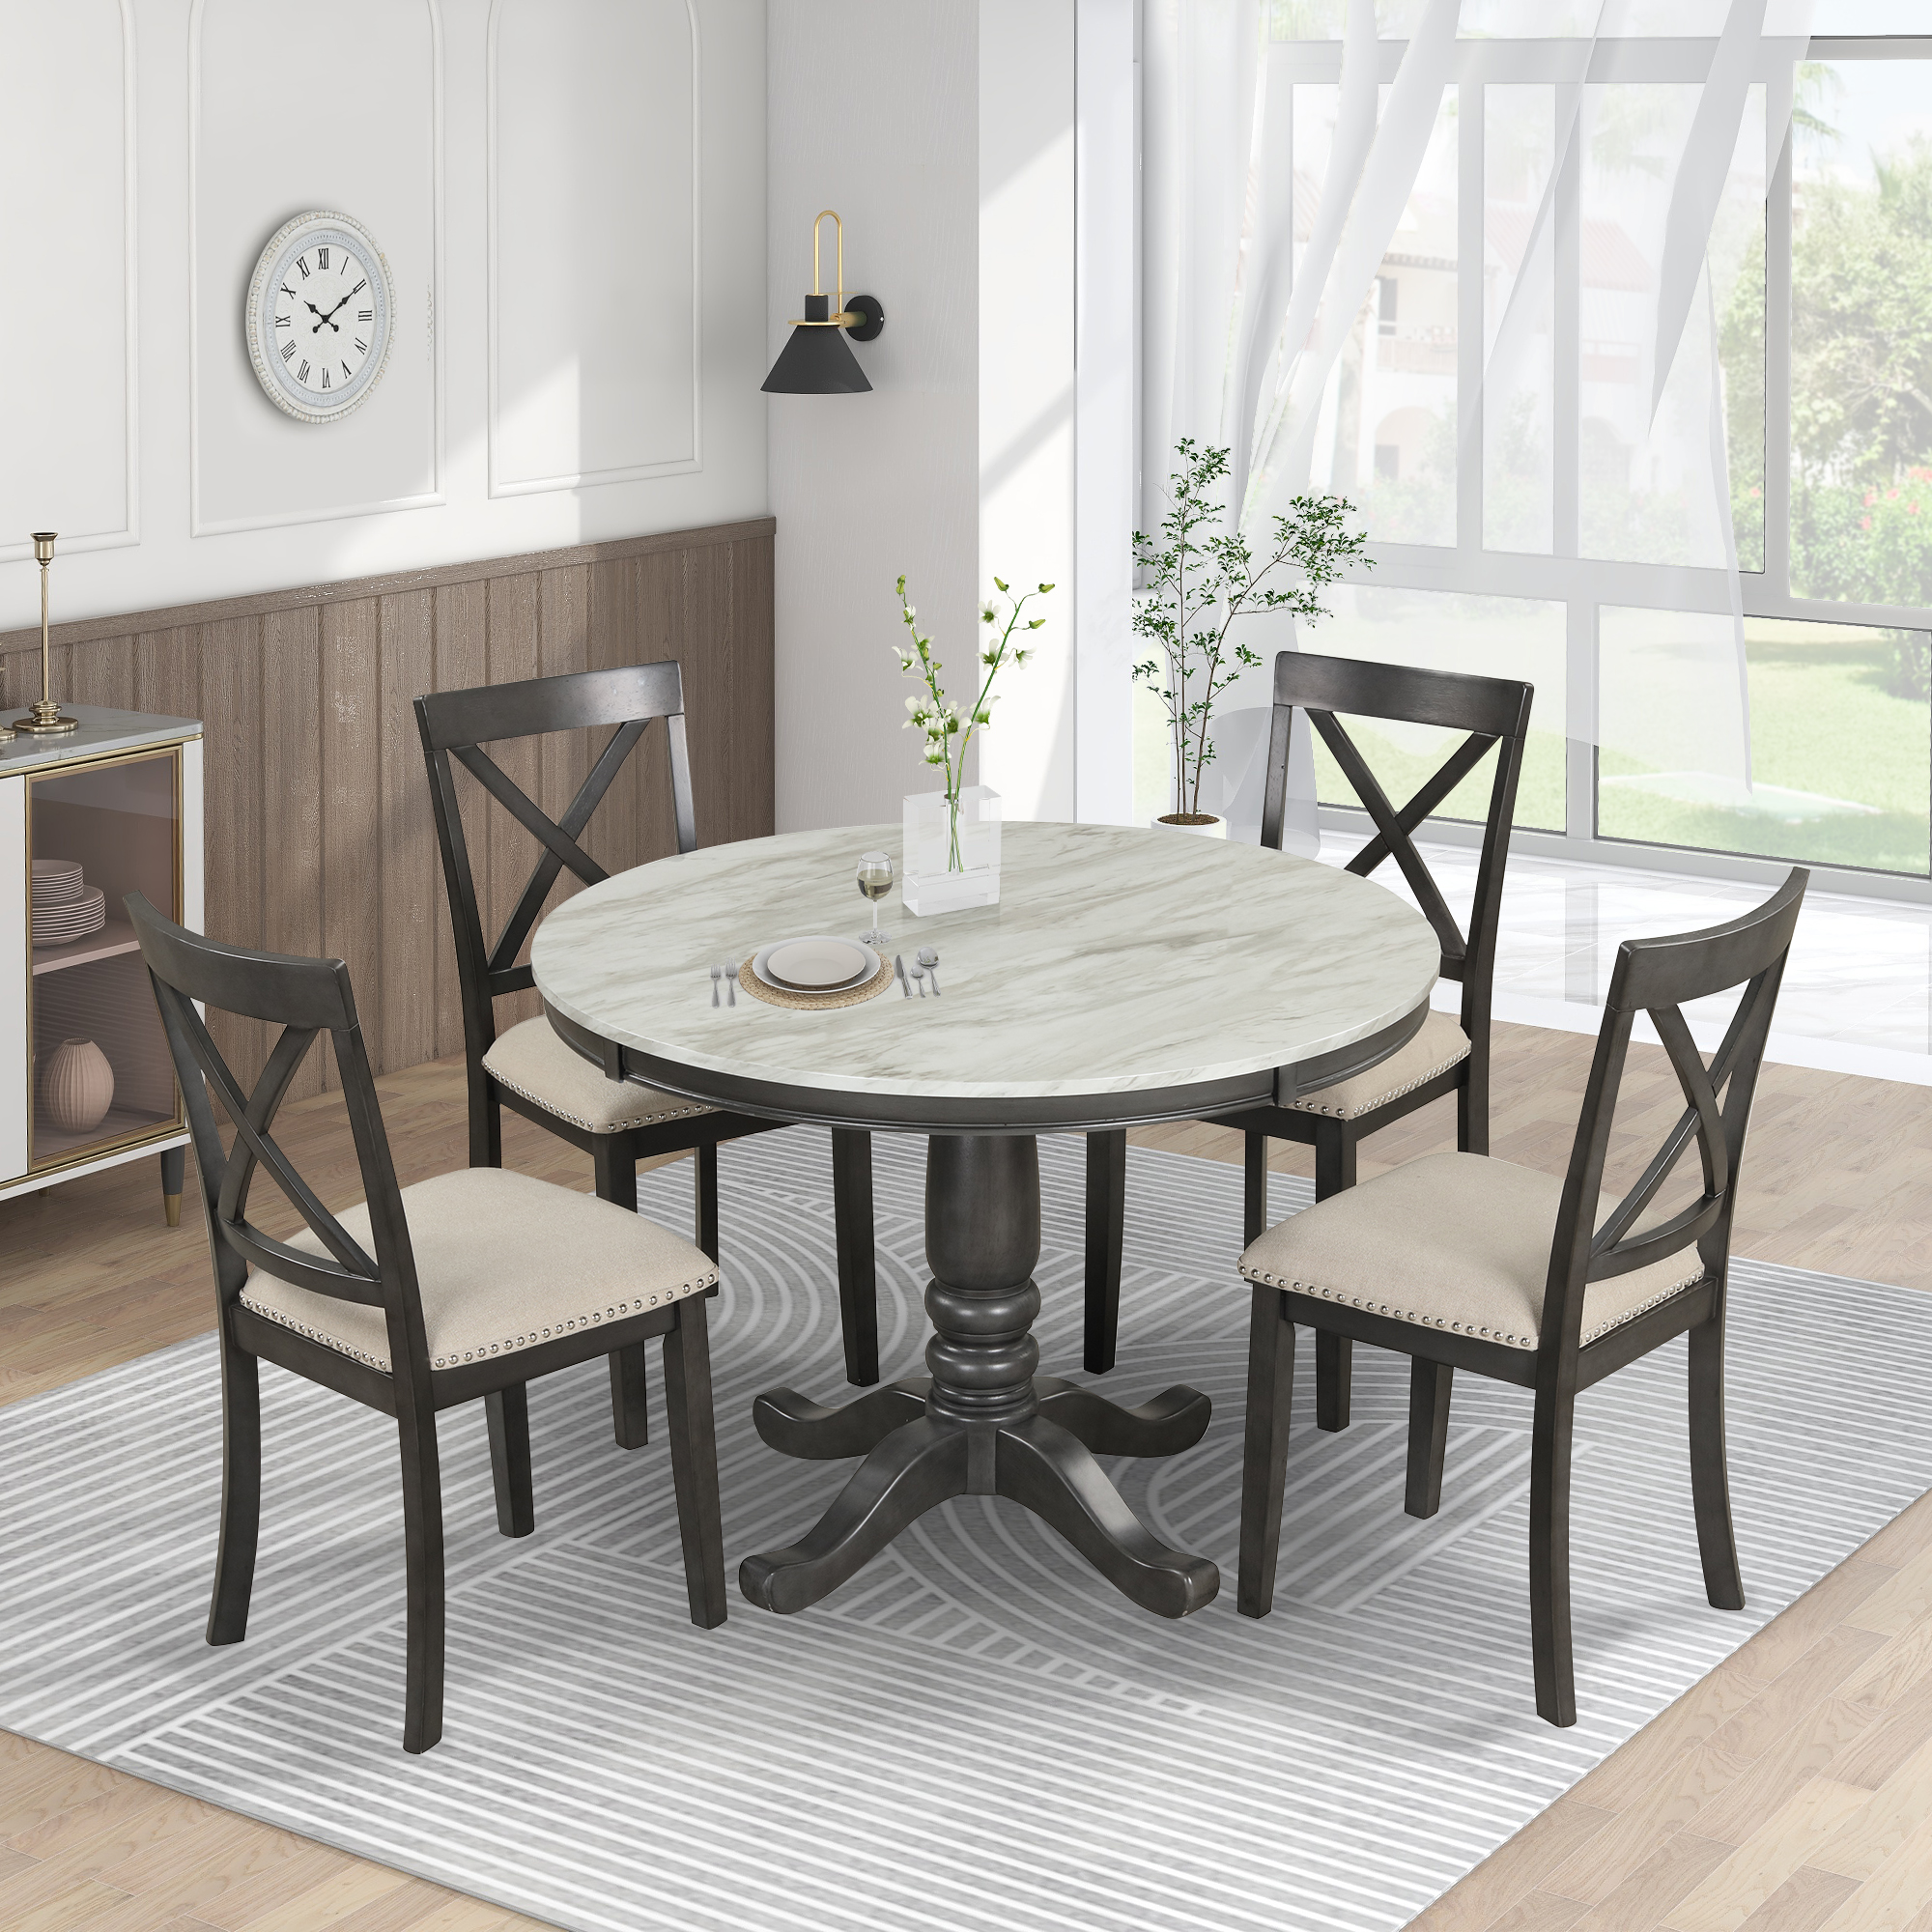 5 Pieces Dining Table and Chairs Set For Four Persons - SG000342AAA